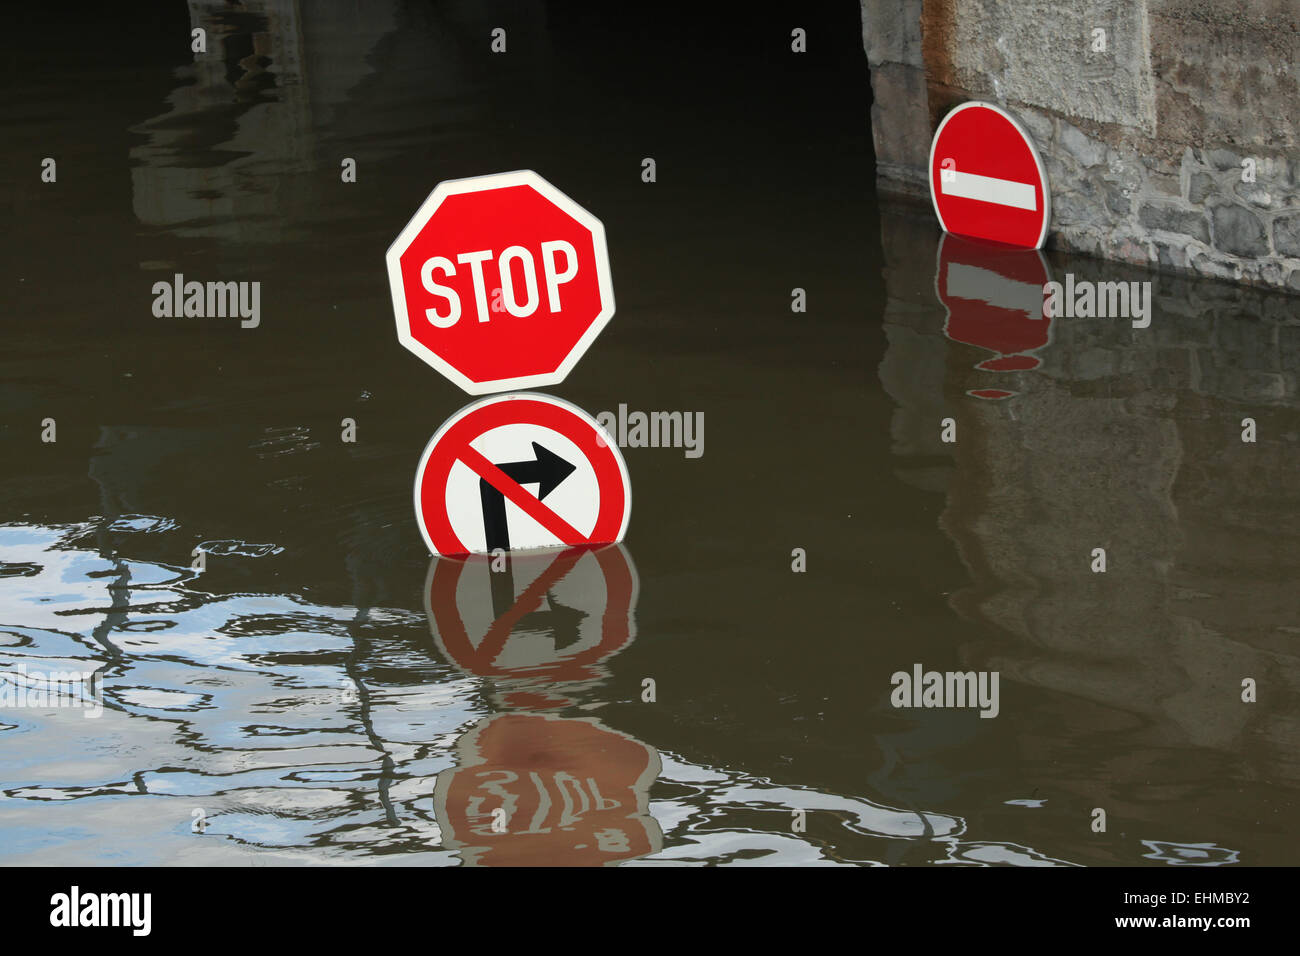 Traffic signs flooded by the Elbe River in Usti nad Labem, Northern Bohemia, Czech Republic, on June 5, 2013. Stock Photo